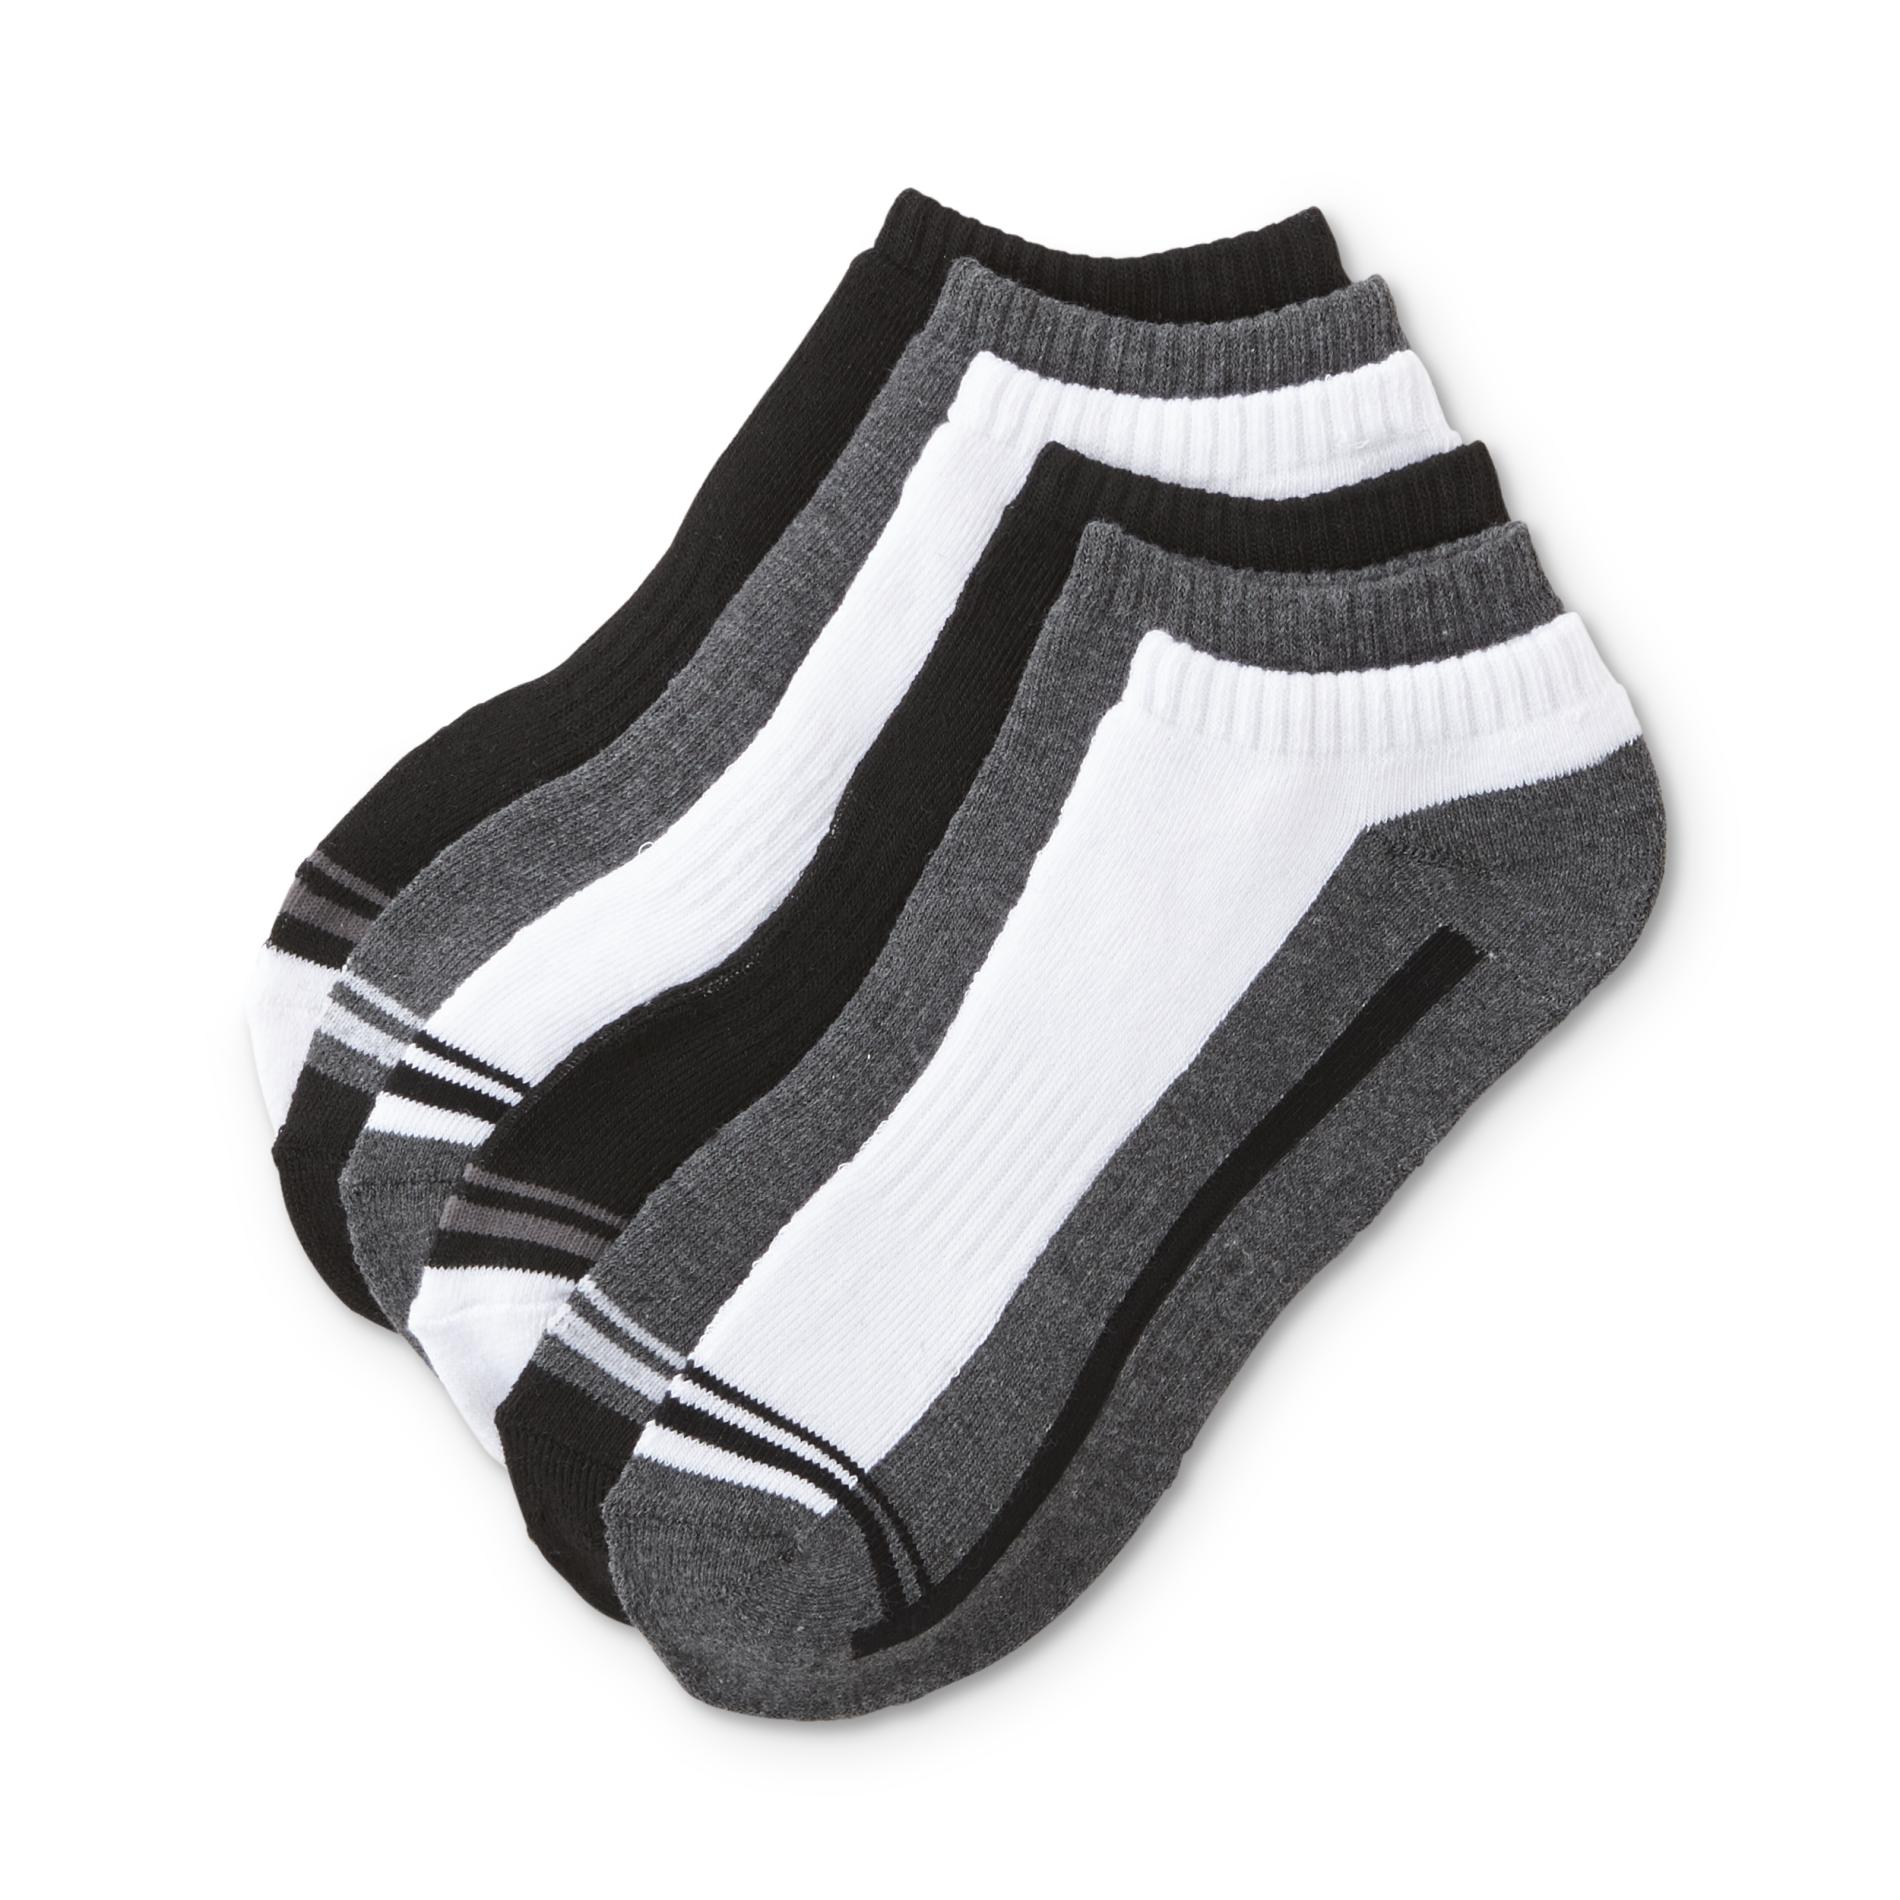 Everlast&reg; Men's 6-Pairs Athletic Arch Support No-Show Socks - Striped